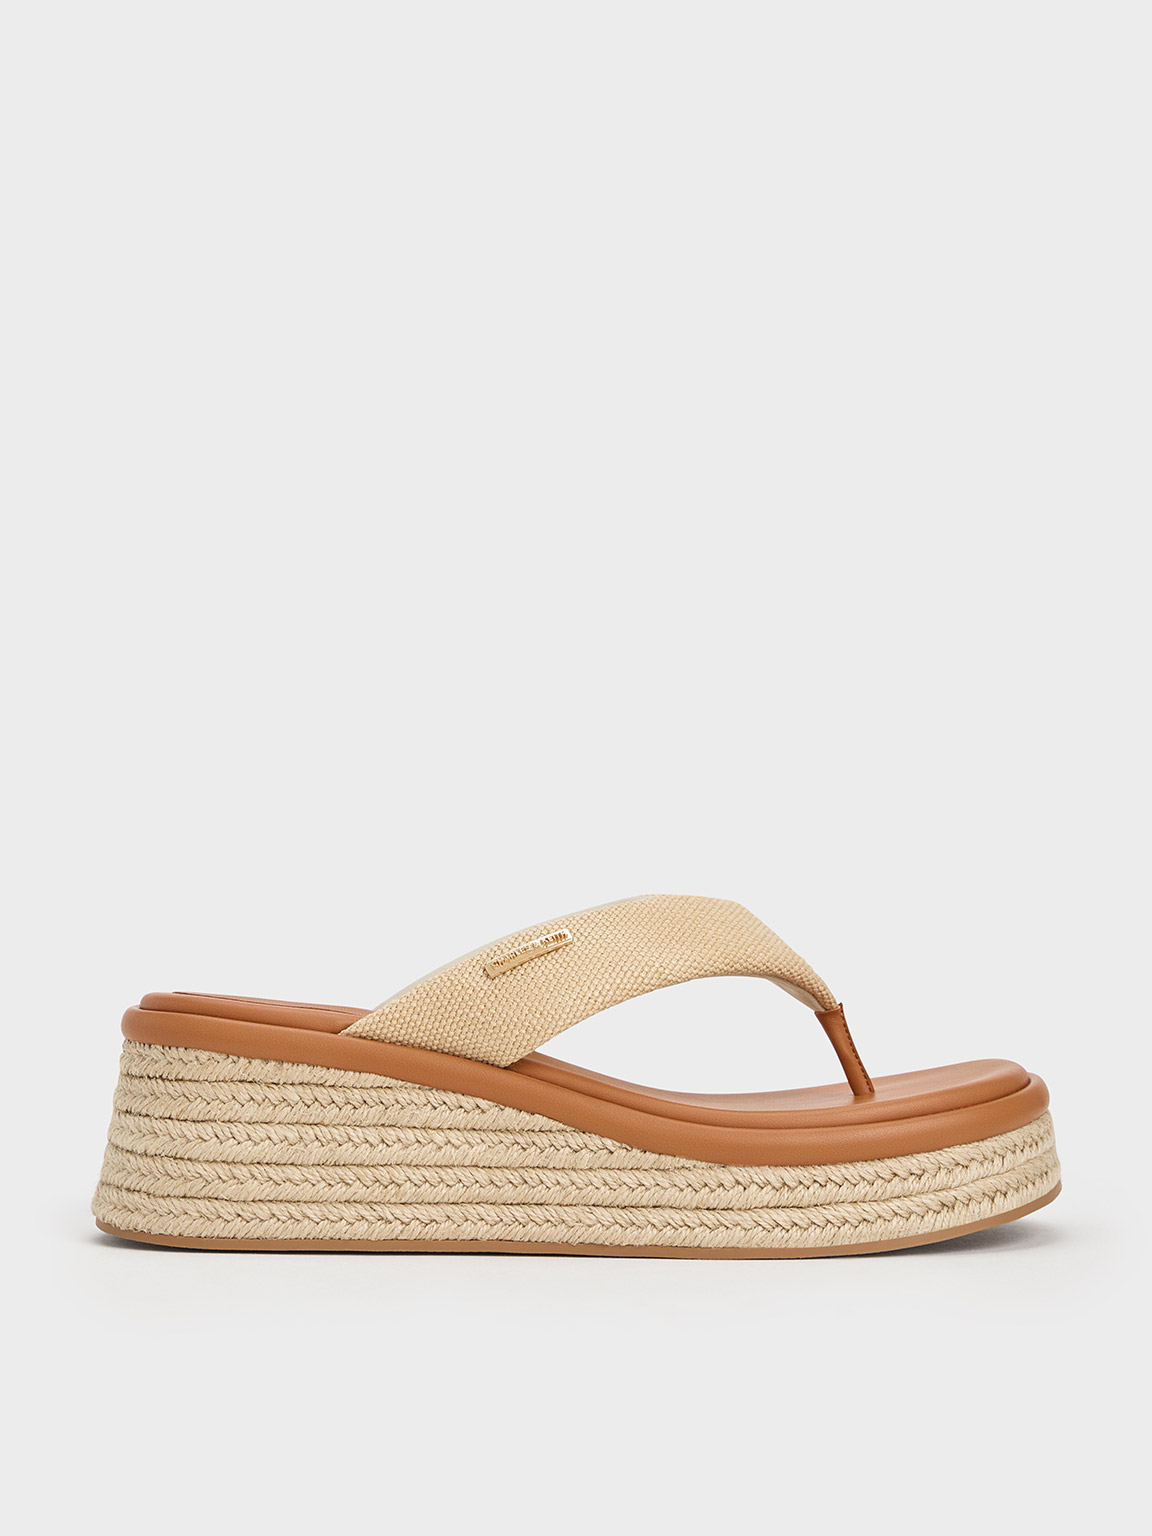 Shop Charles & Keith - Woven Espadrille Thong Sandals